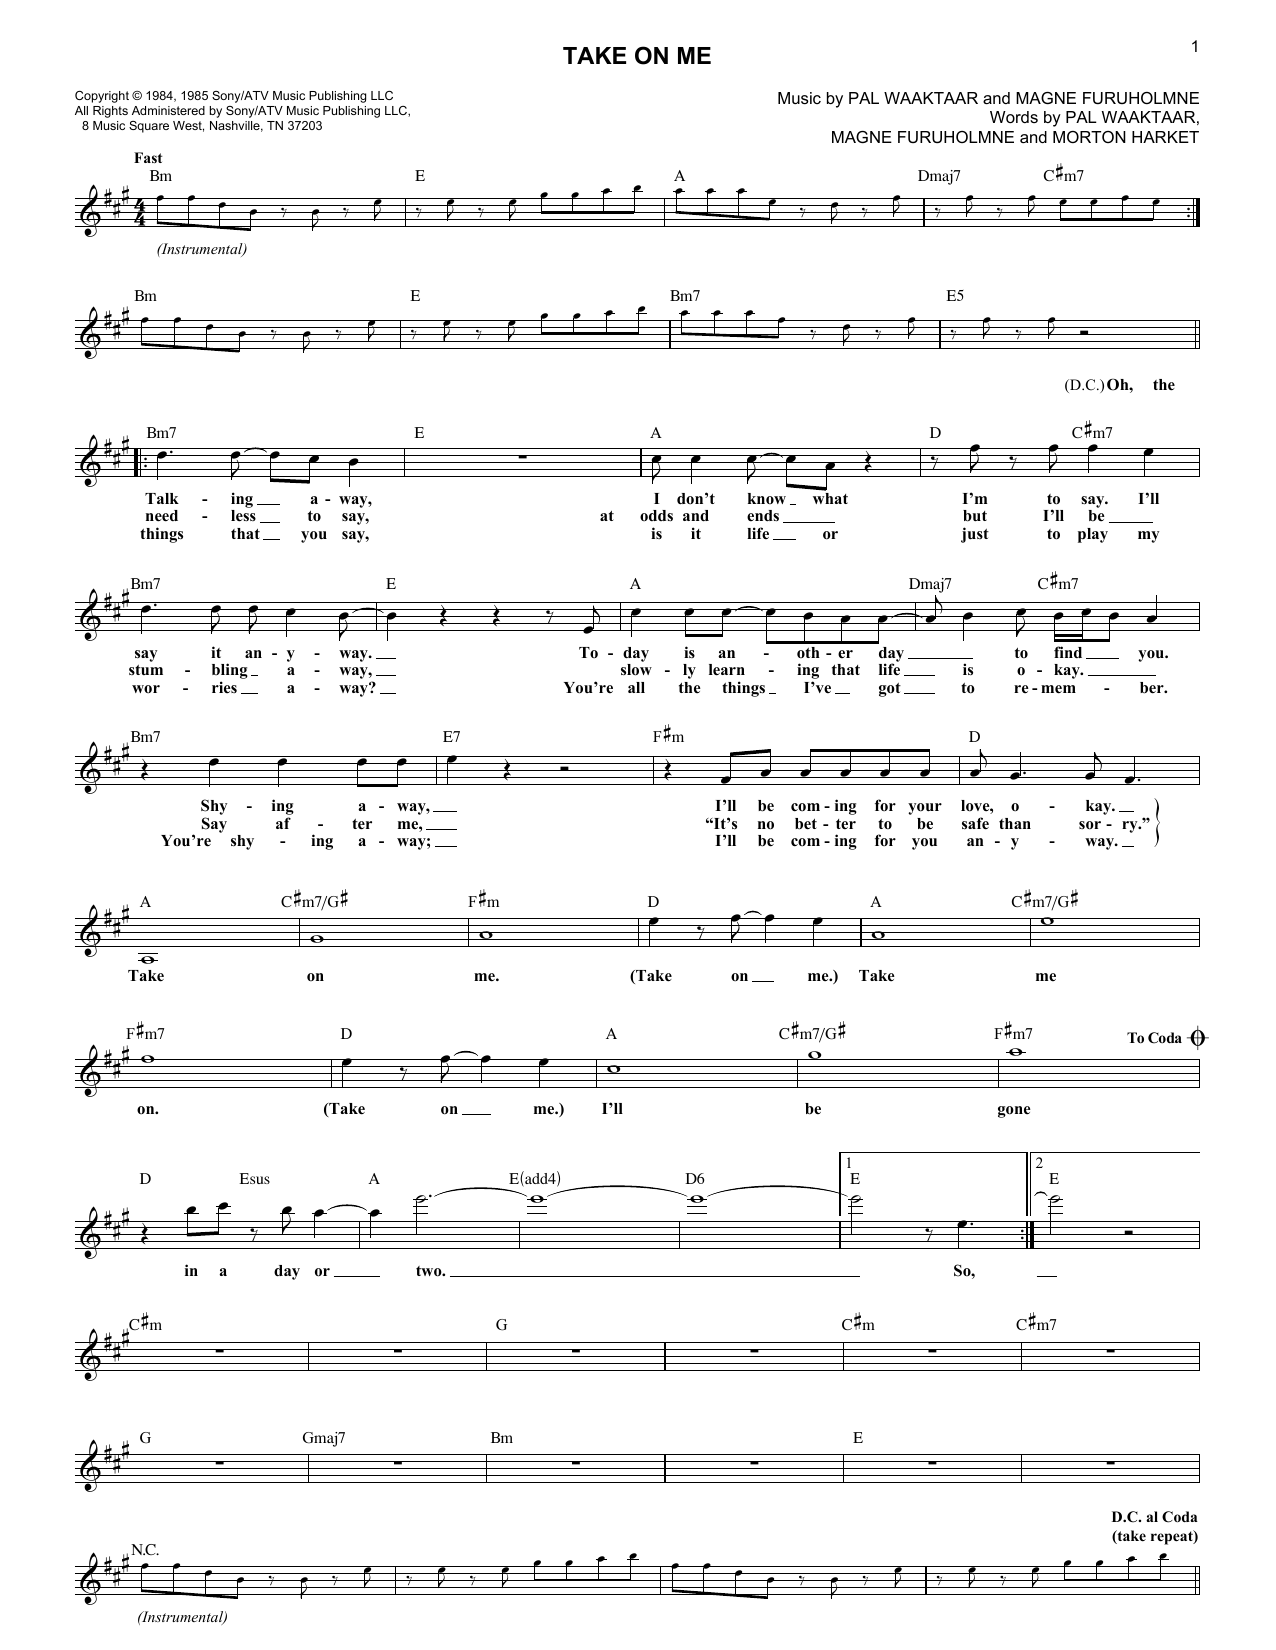 A-Ha Take On Me sheet music notes and chords. Download Printable PDF.